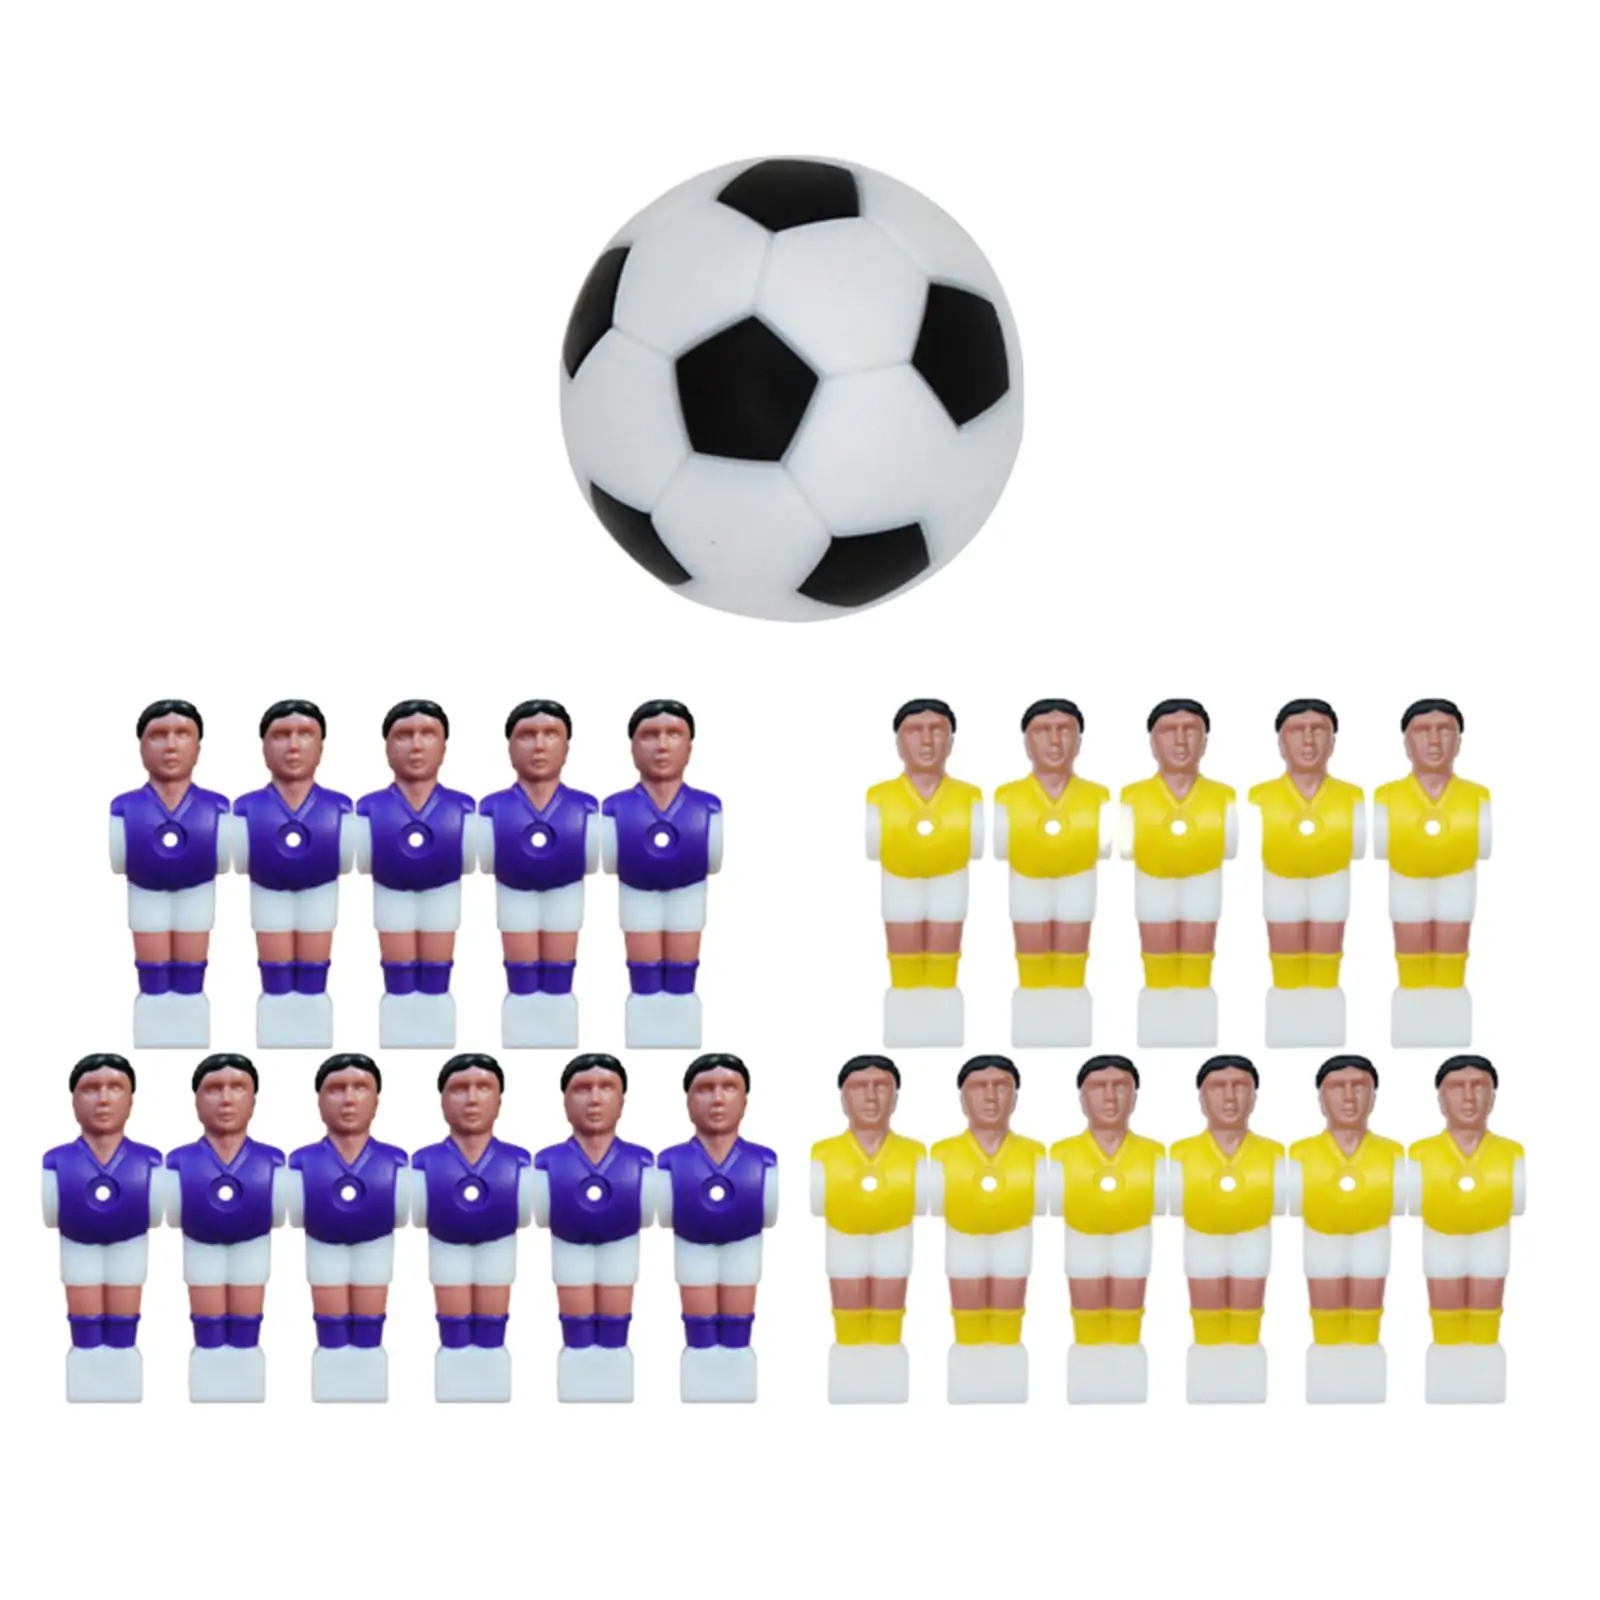 Foosball Men Replacement Football Players Figures Toys Football Player Part